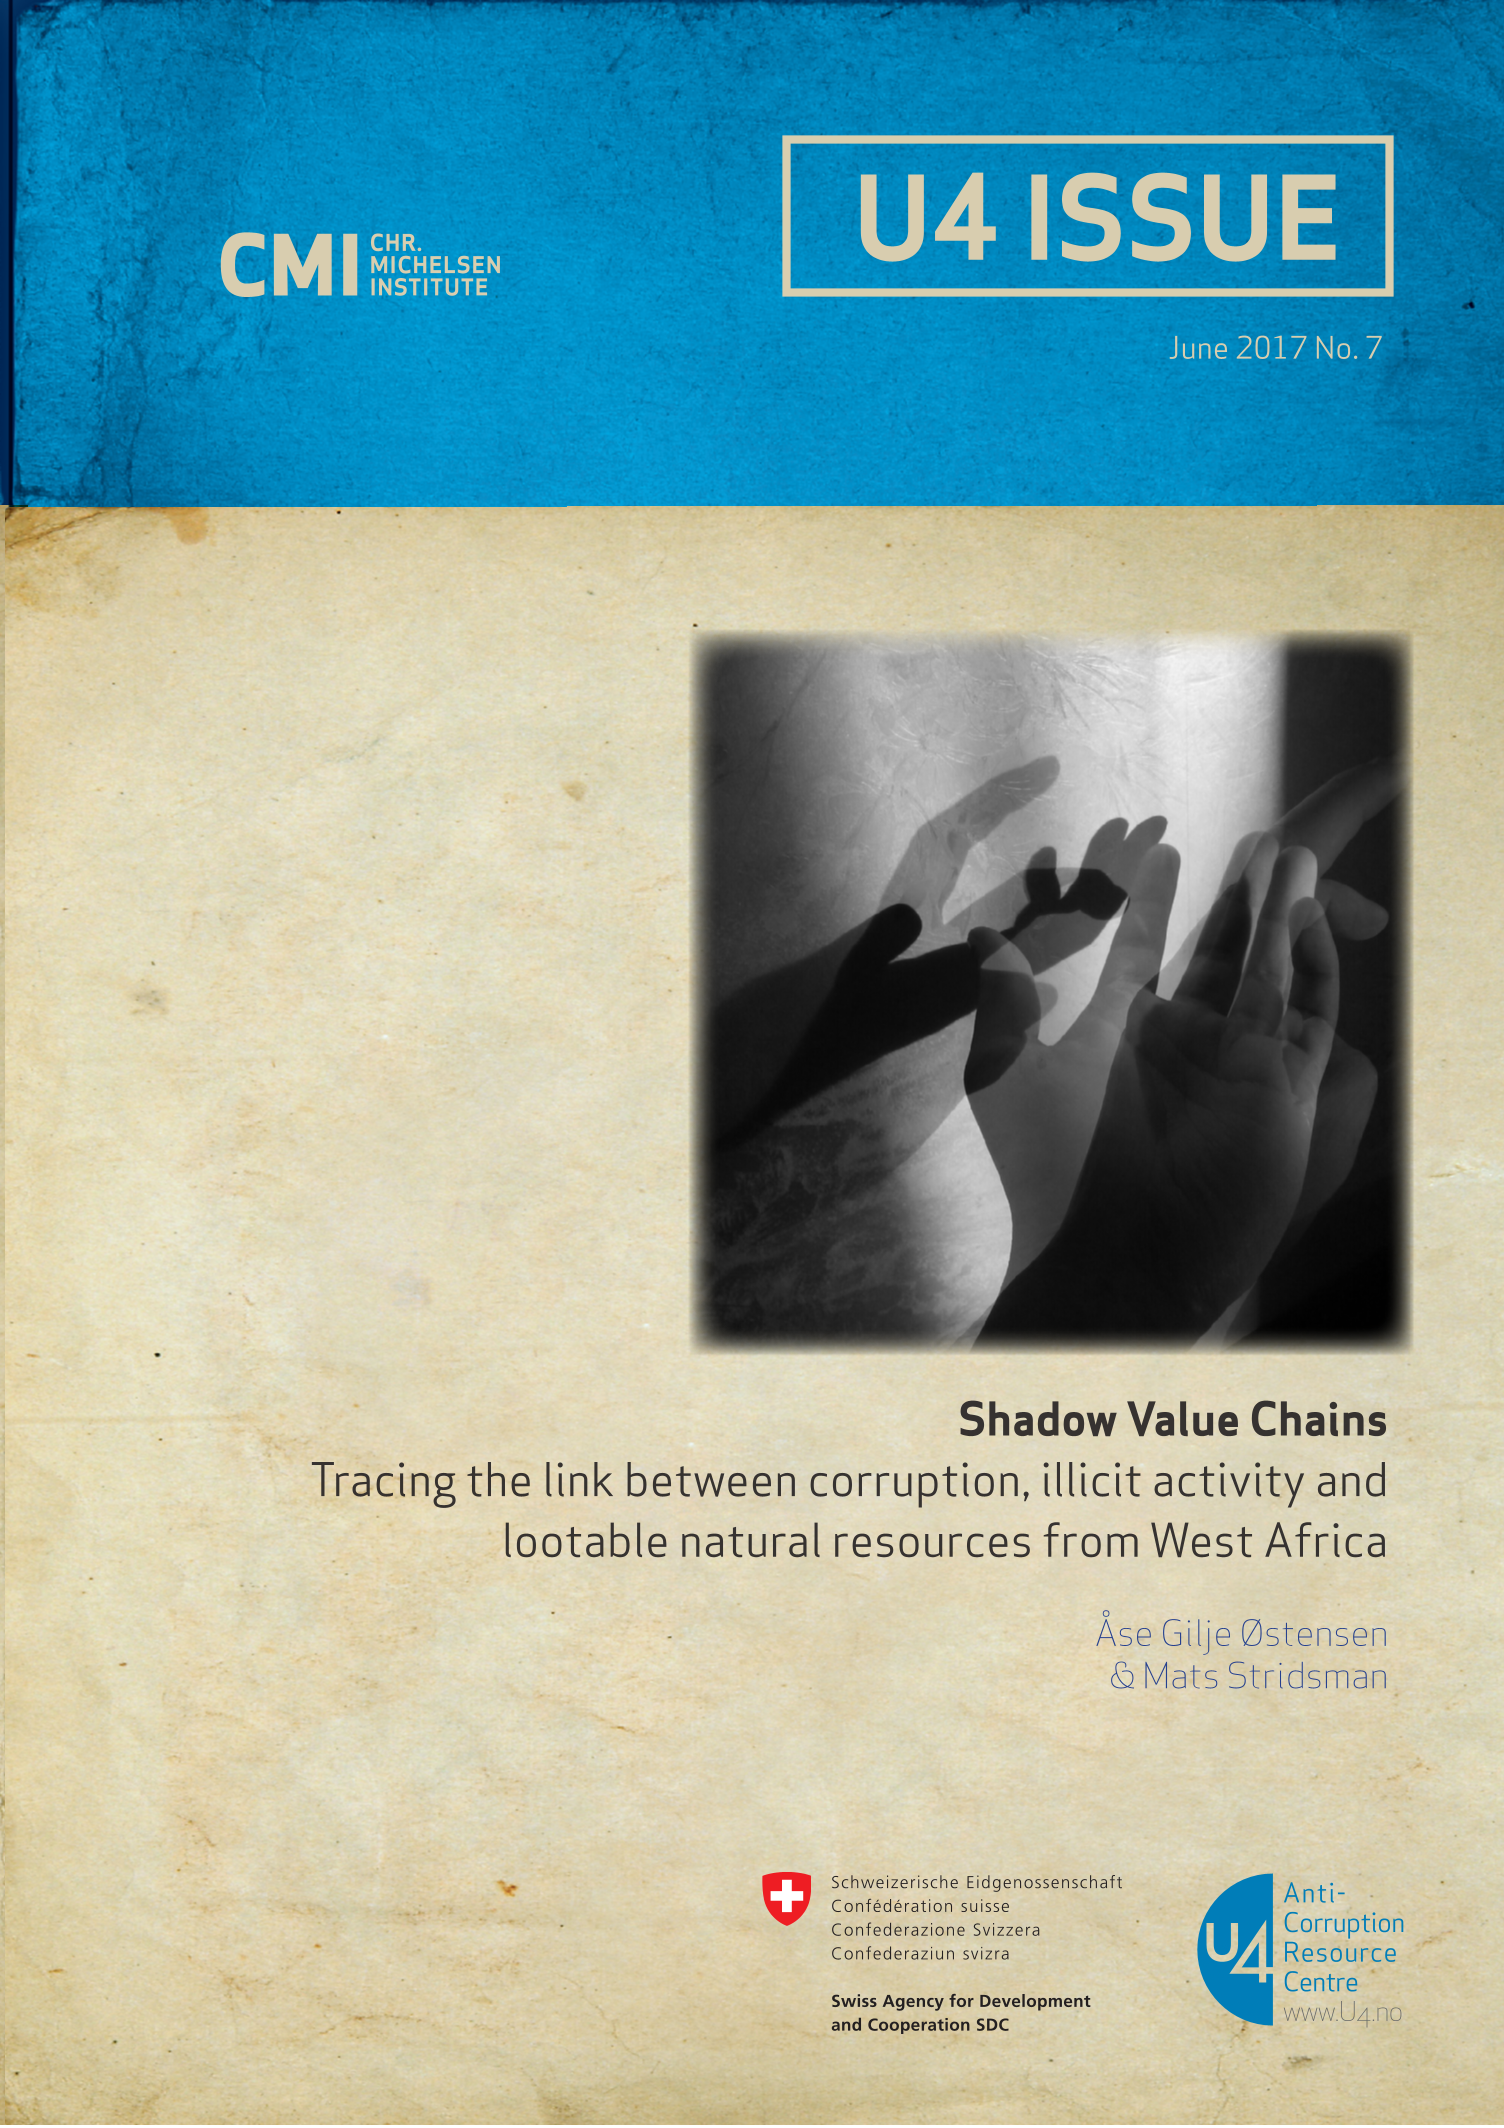 Shadow value chains: Tracing the link between corruption, illicit activity and lootable natural resources from West Africa